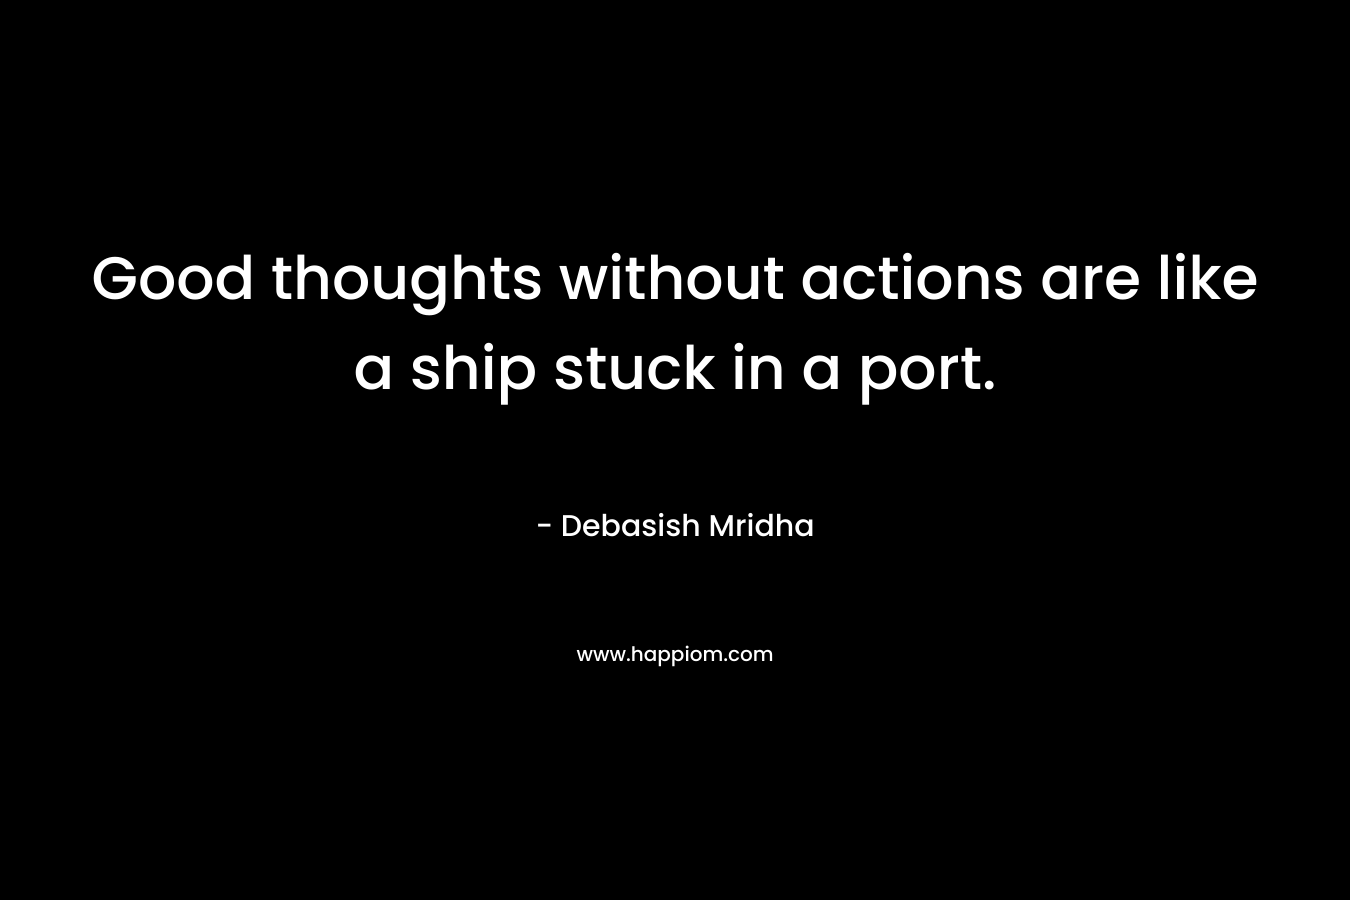 Good thoughts without actions are like a ship stuck in a port. – Debasish Mridha